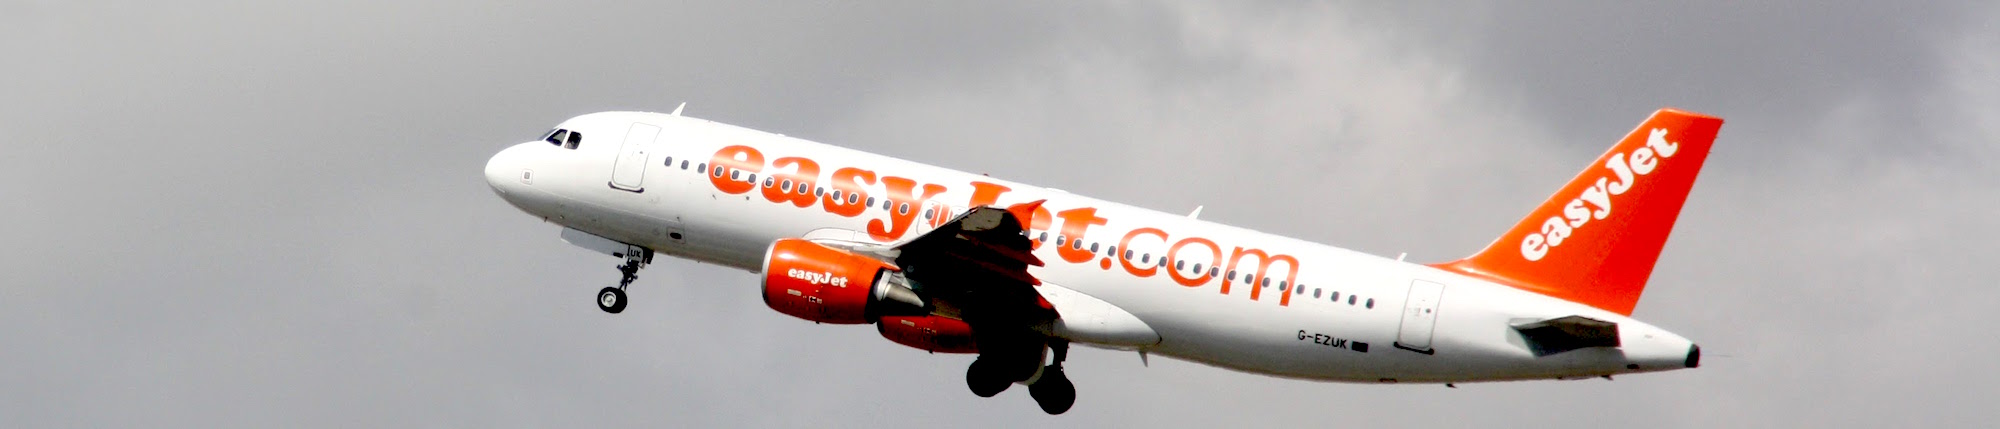 Best time to book flights for Bristol (BRS) to Tenerife (TFS) flights with EasyJet at AirHint